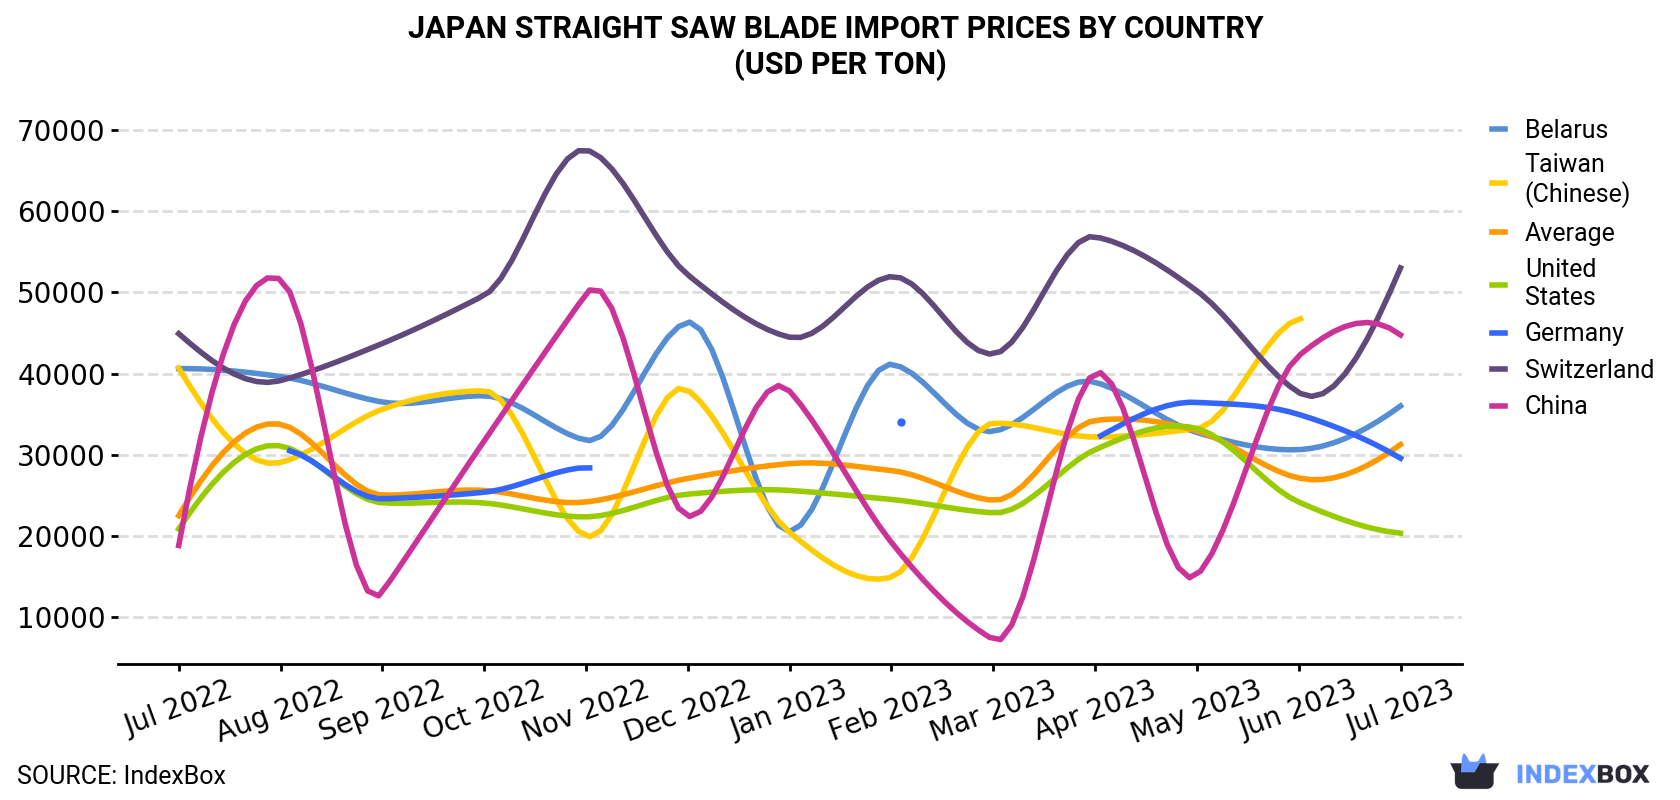 Japan Straight Saw Blade Import Prices By Country (USD Per Ton)